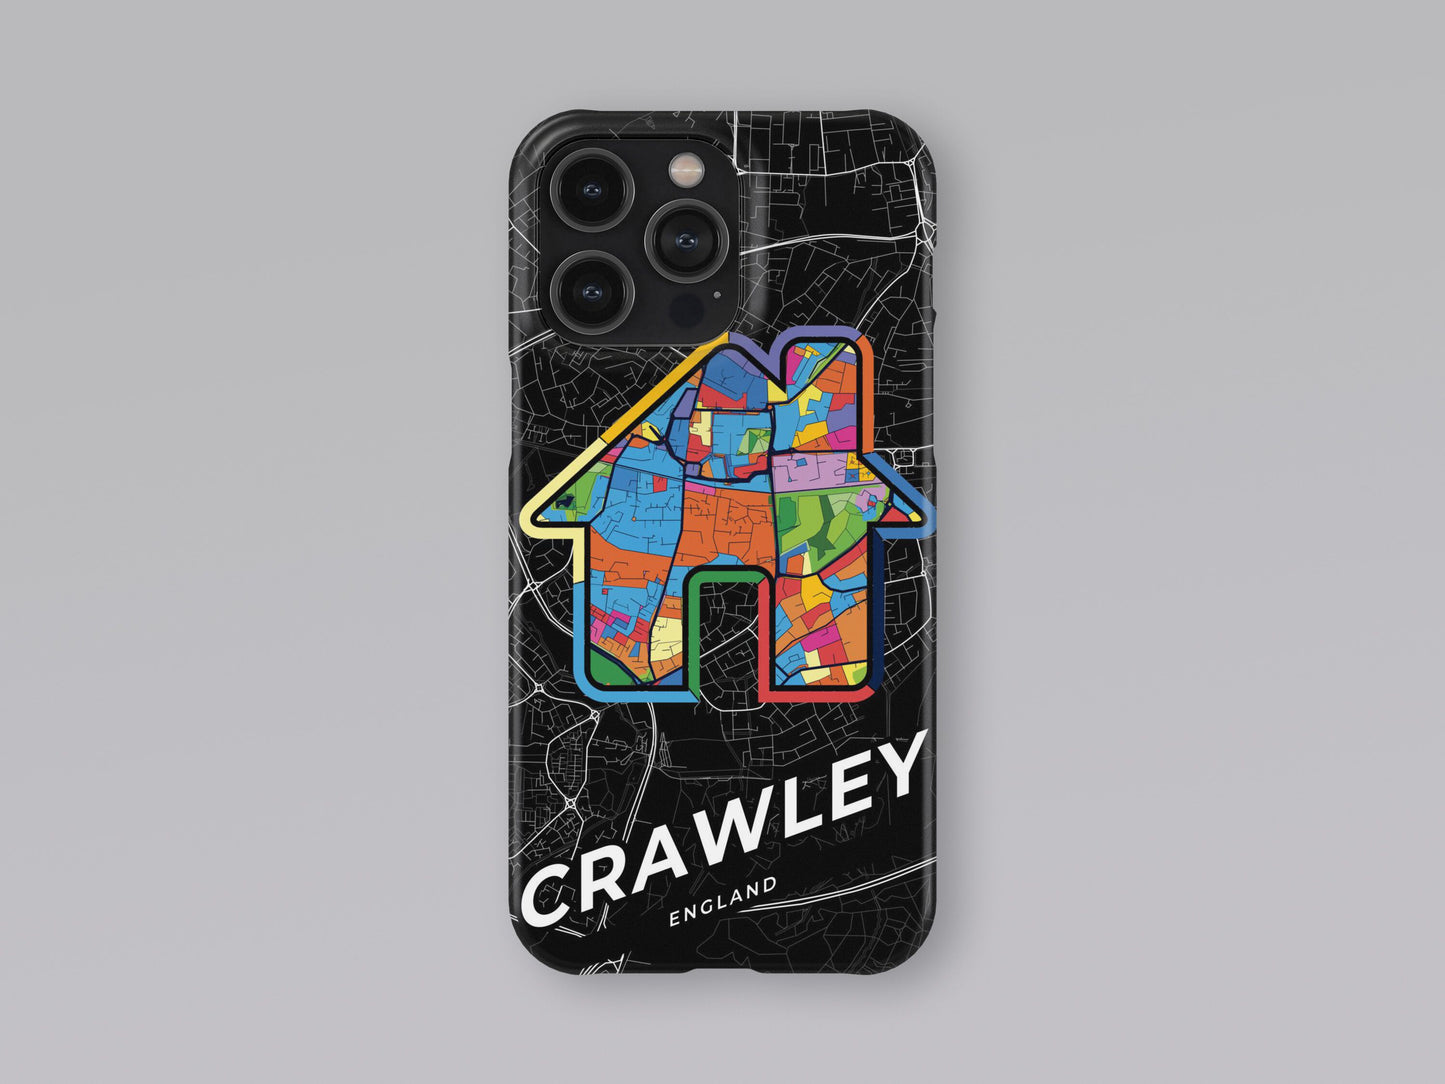 Crawley England slim phone case with colorful icon. Birthday, wedding or housewarming gift. Couple match cases. 3